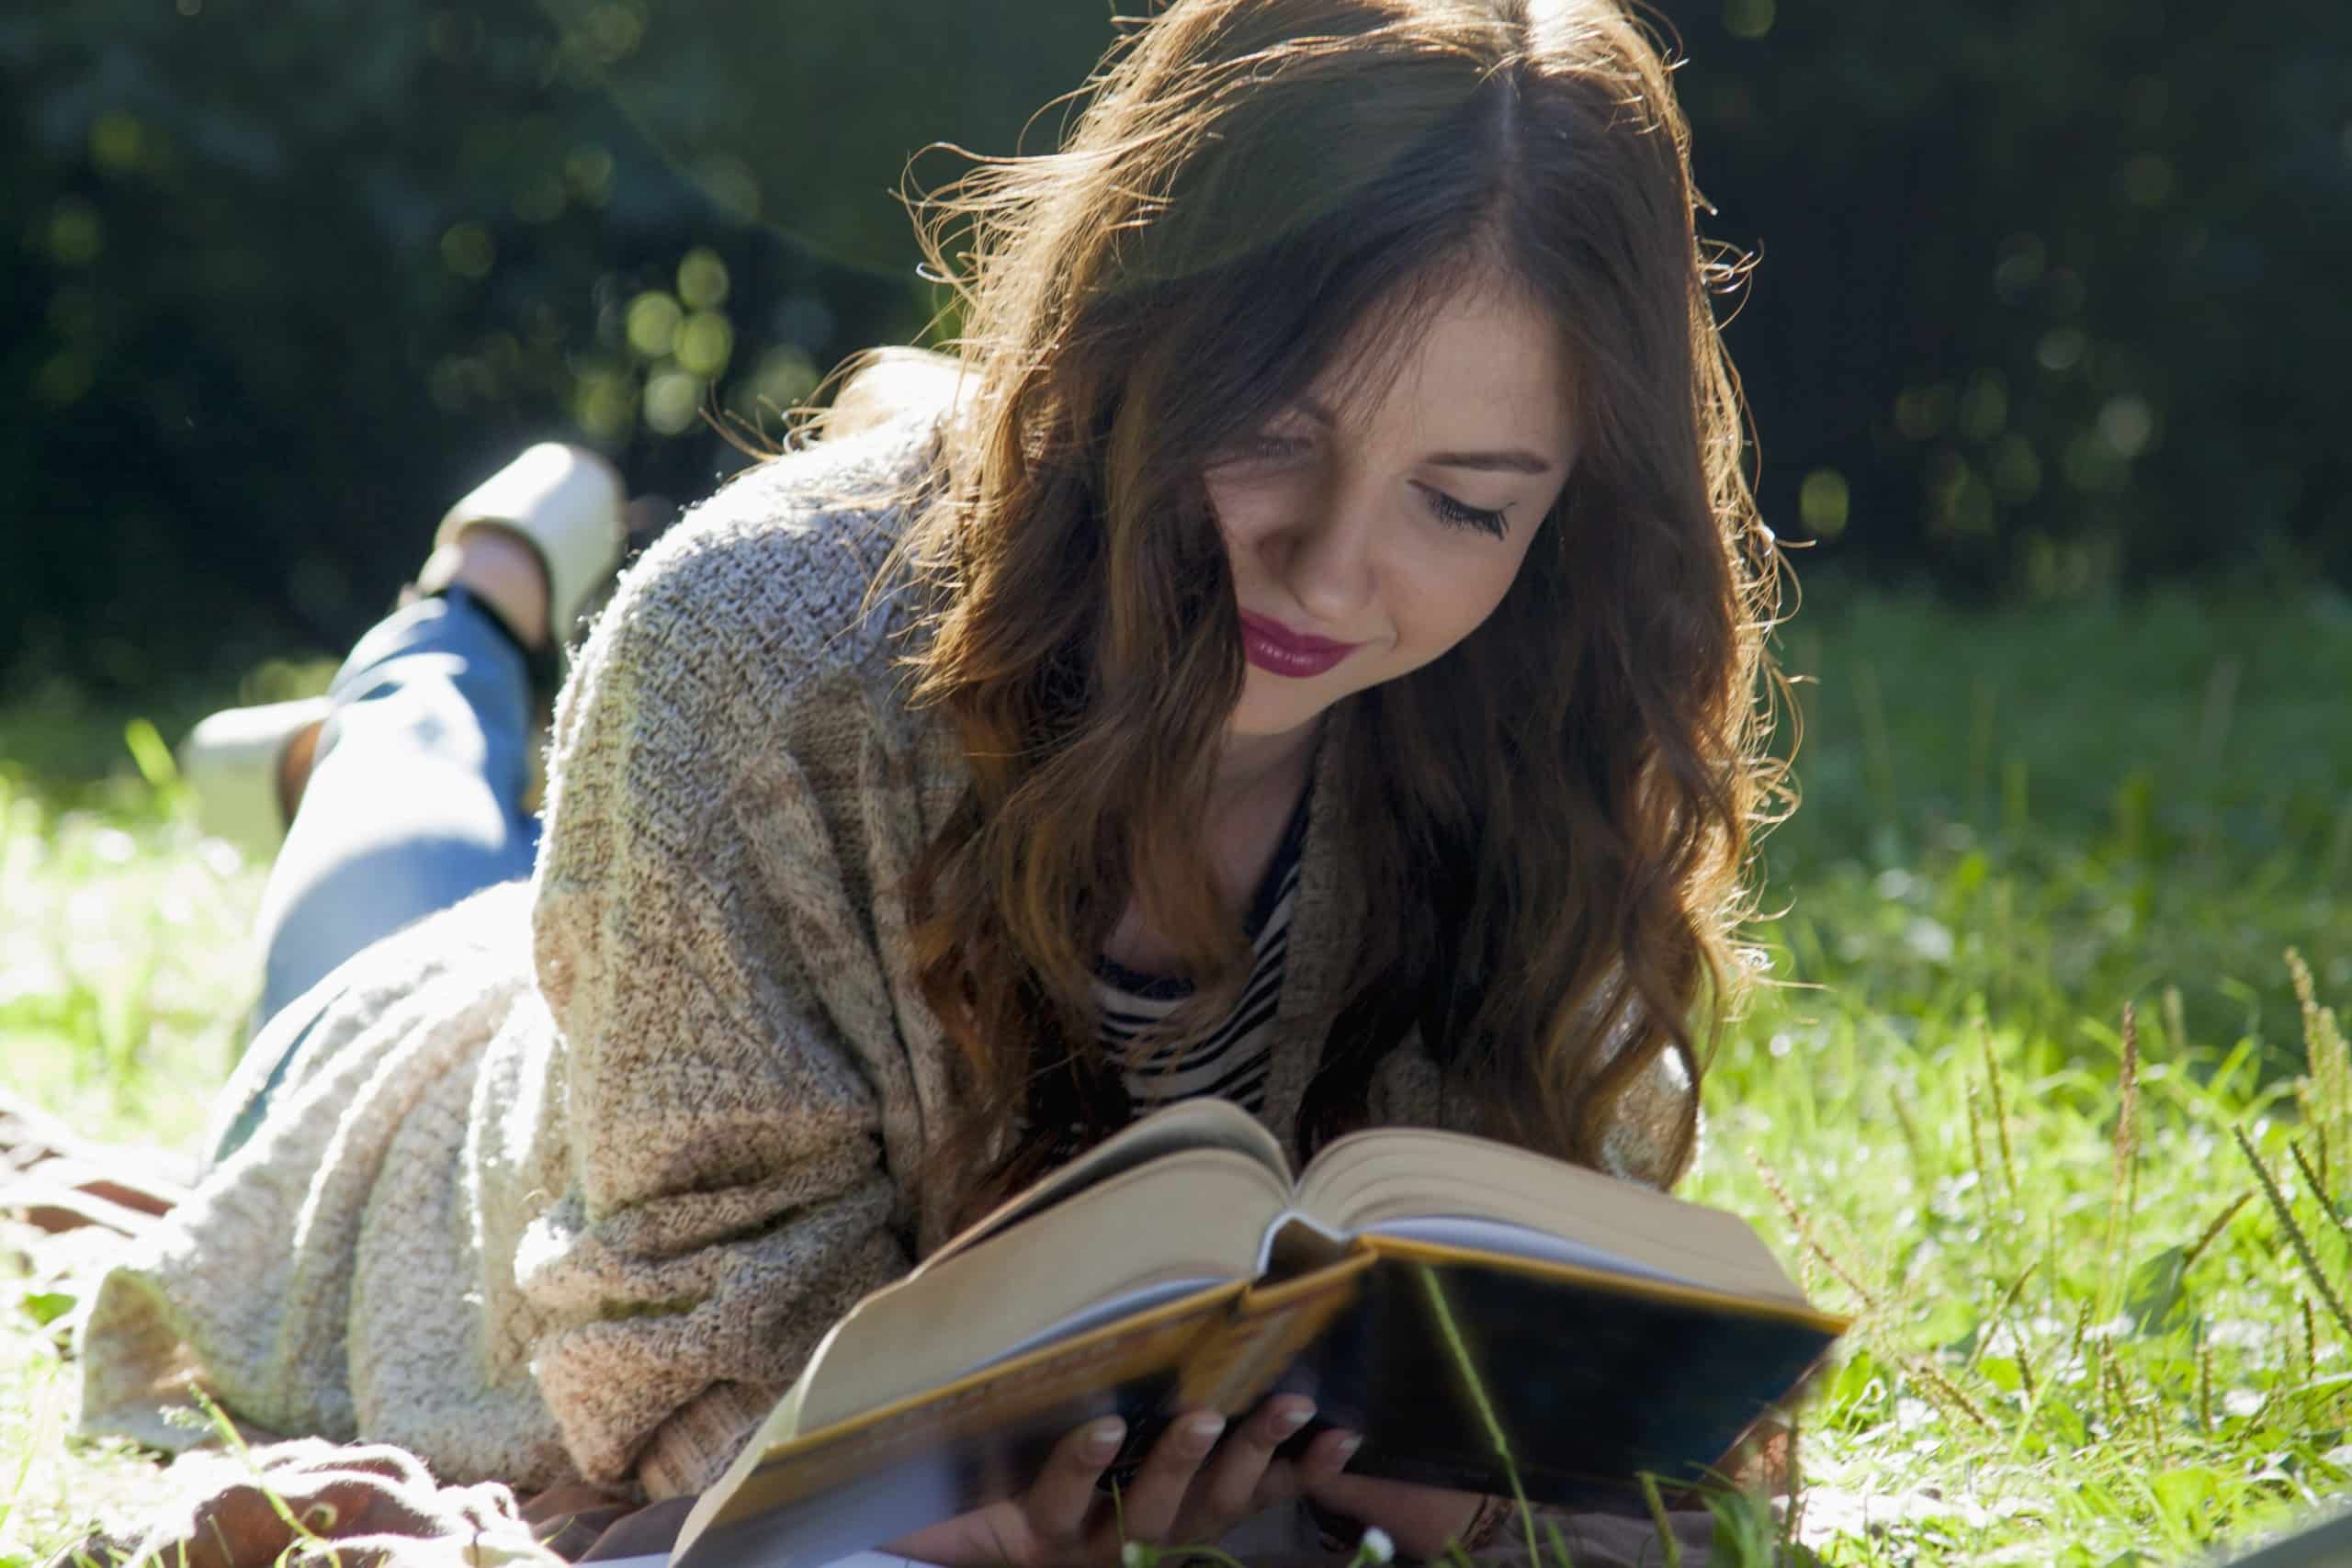 Beautiful young woman reading a book outdoors.